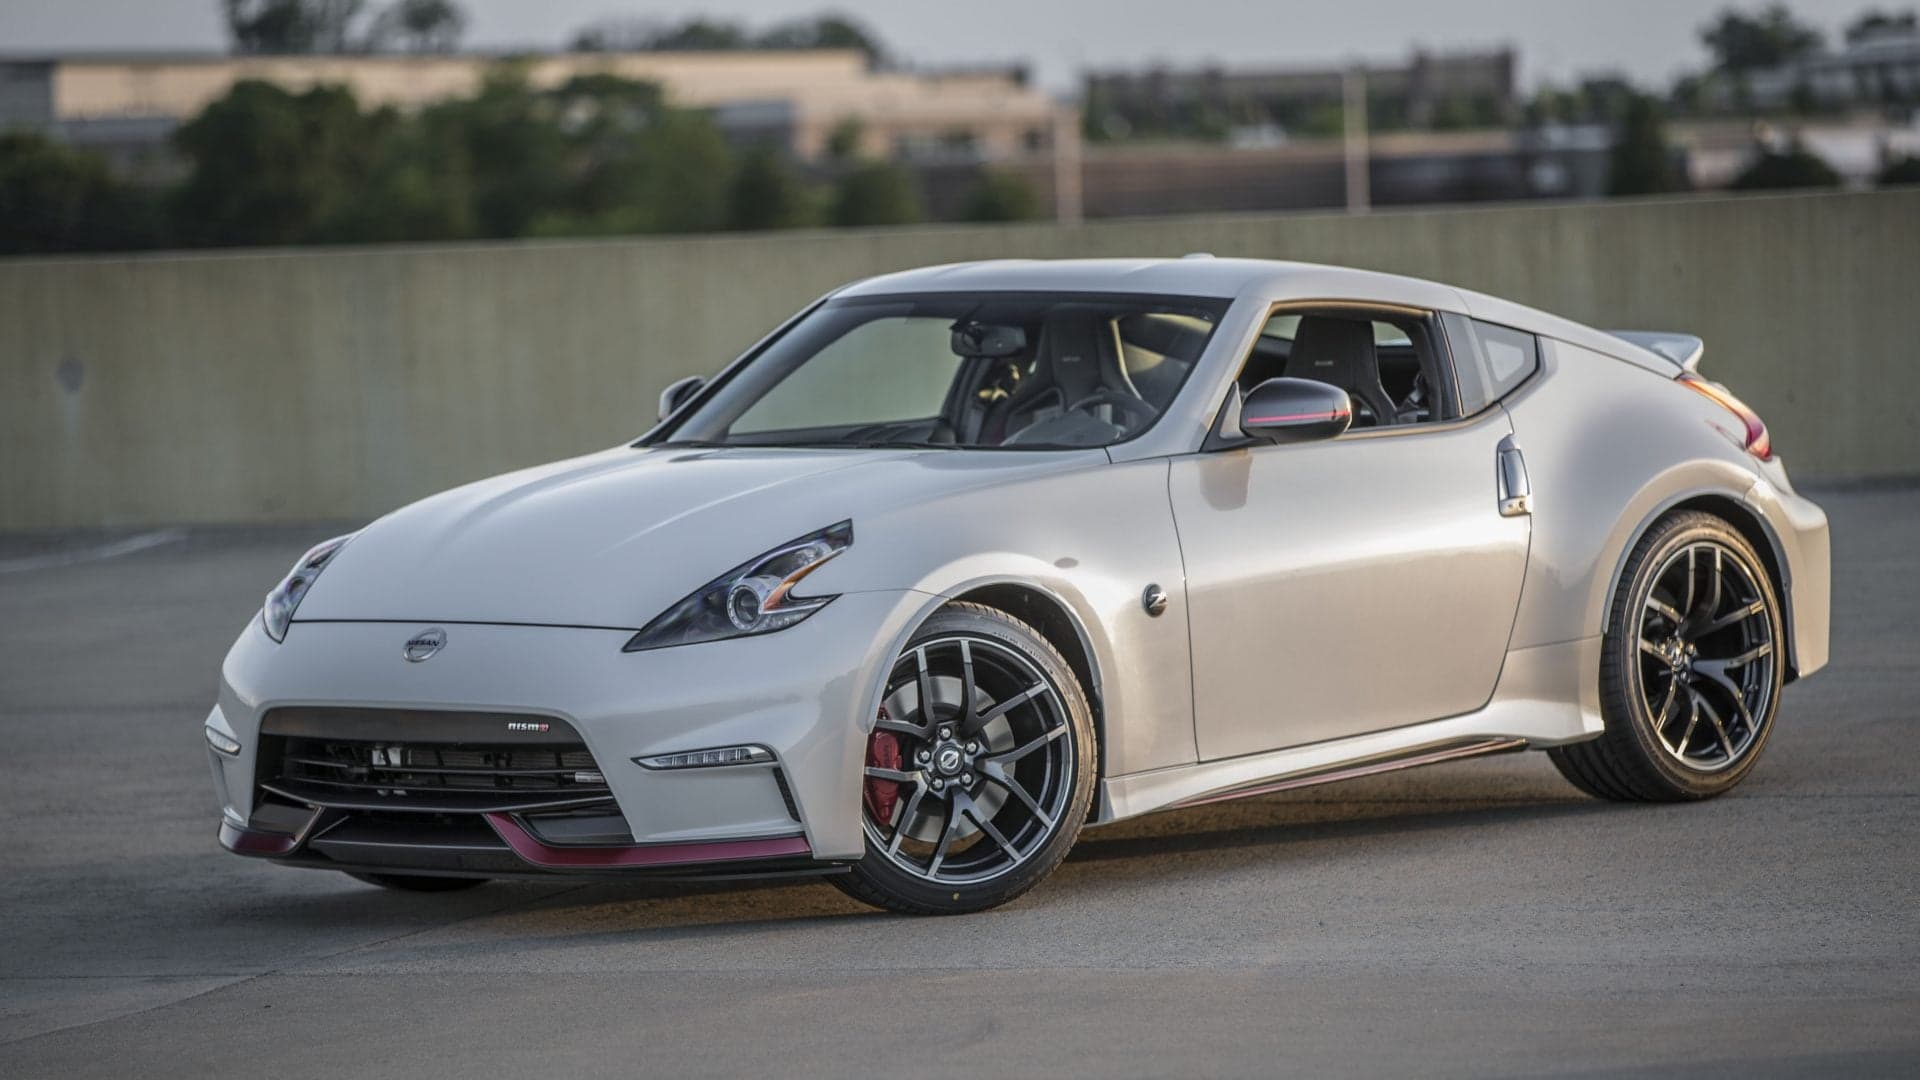 Nissan Isn’t Giving Up on the Z-Car Just Yet